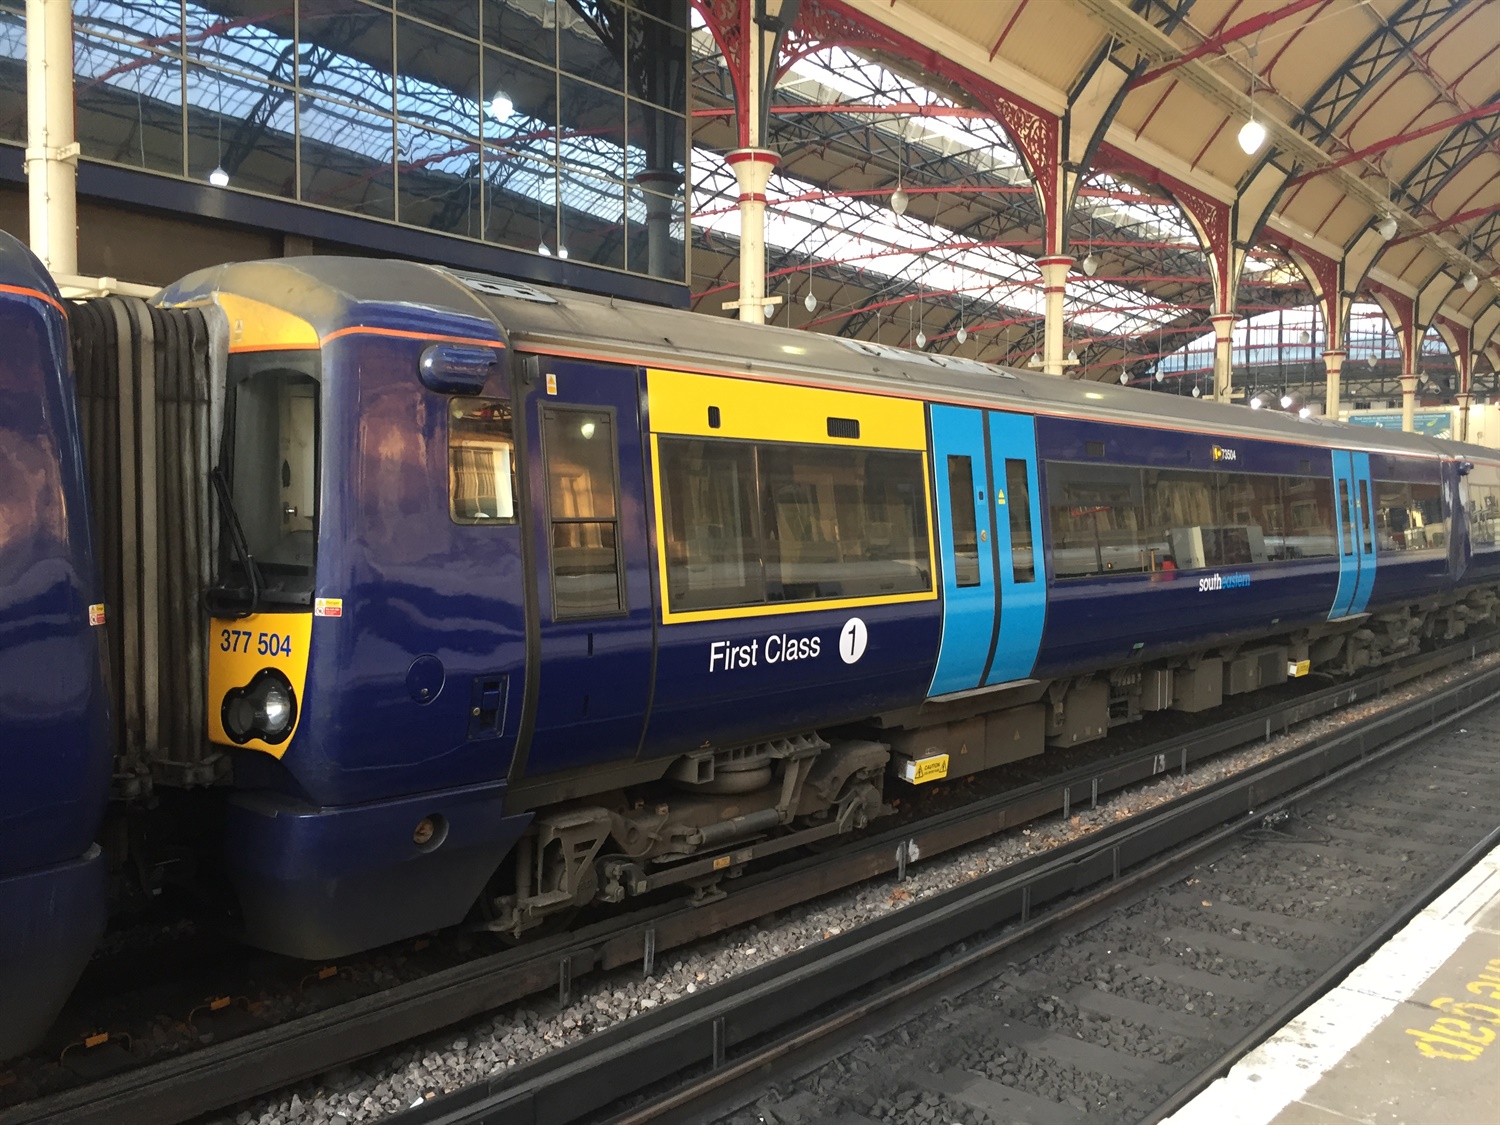 Southeastern fined £2.5m after cleaner is electrocuted on live rail